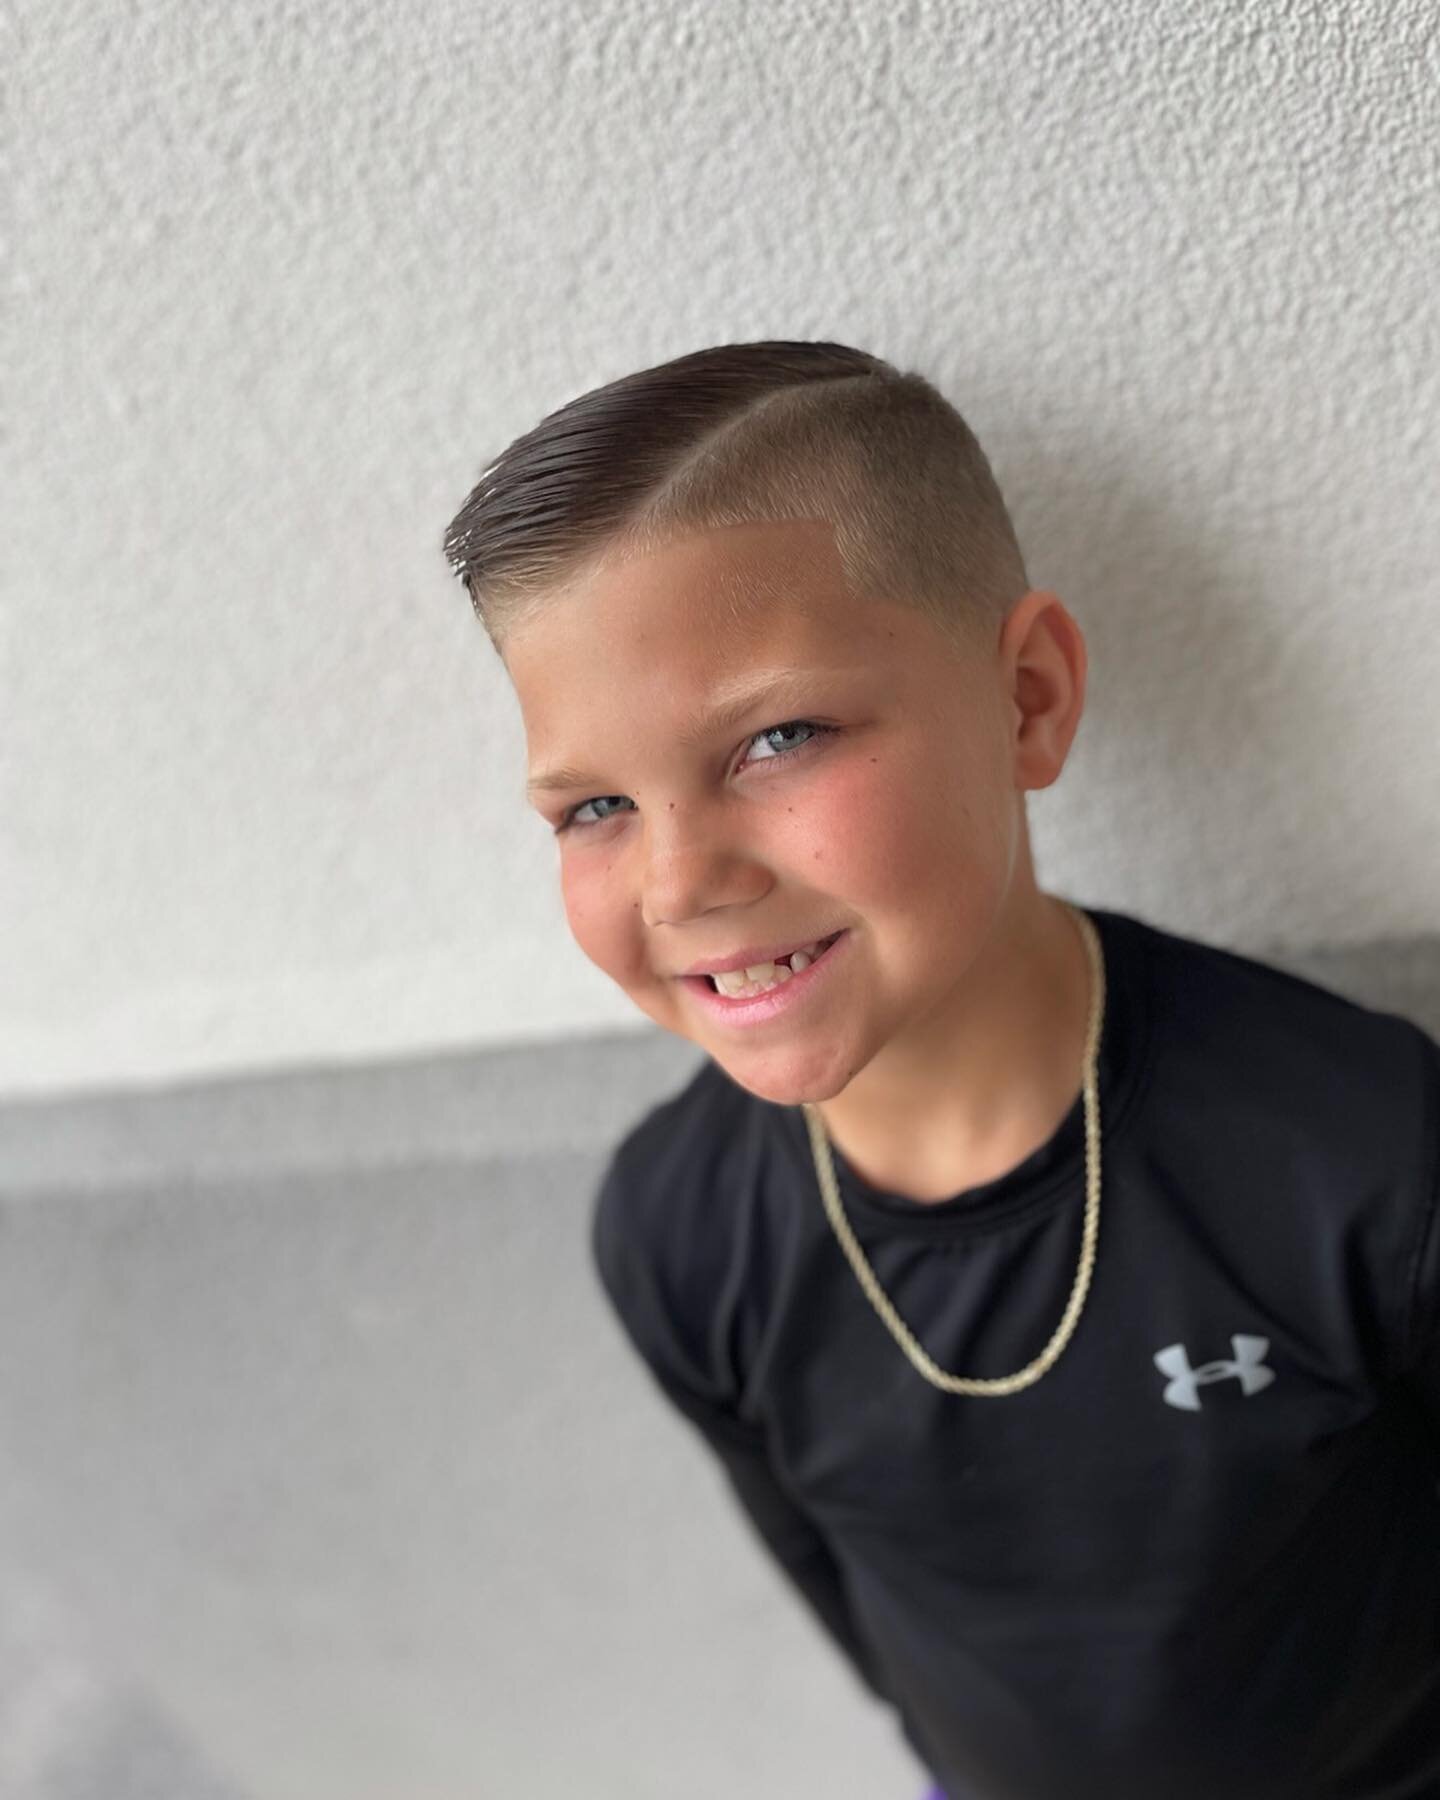 Don&rsquo;t forget we also do children&rsquo;s cuts as well.

#hohpcb #houseofhandsome #panamacity #panamacitybeach #florida #barber #kidscut #haircut #fade #barbernation #floridabarber #wedoitall